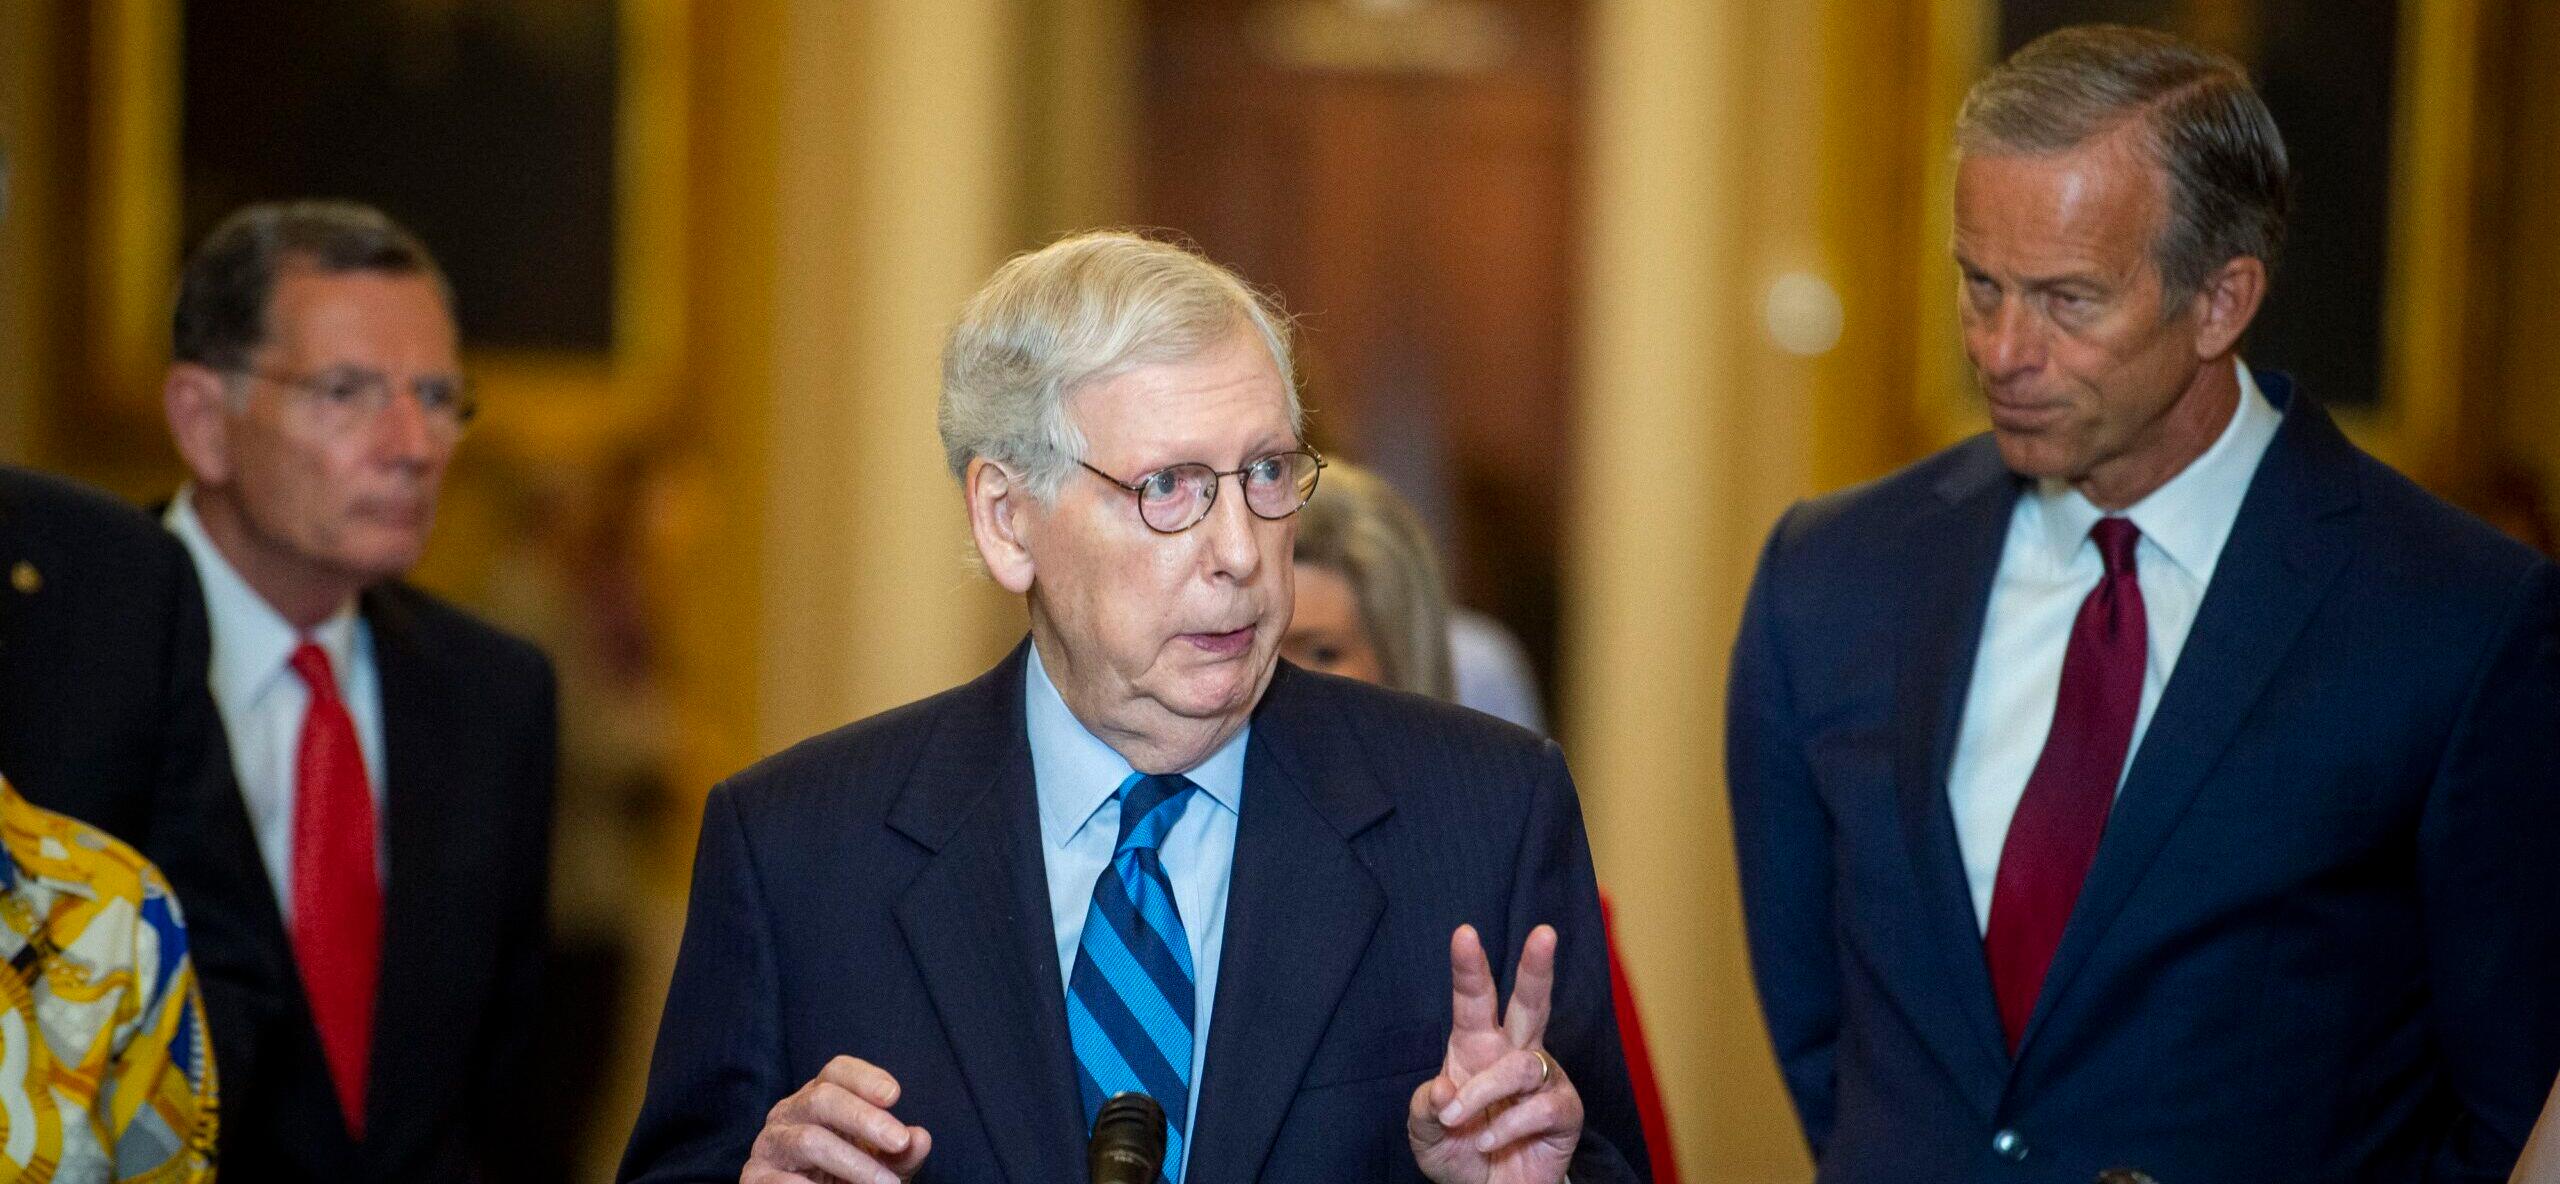 Mitch McConnell Has Reportedly Been Tripping And Falling A Lot This Year